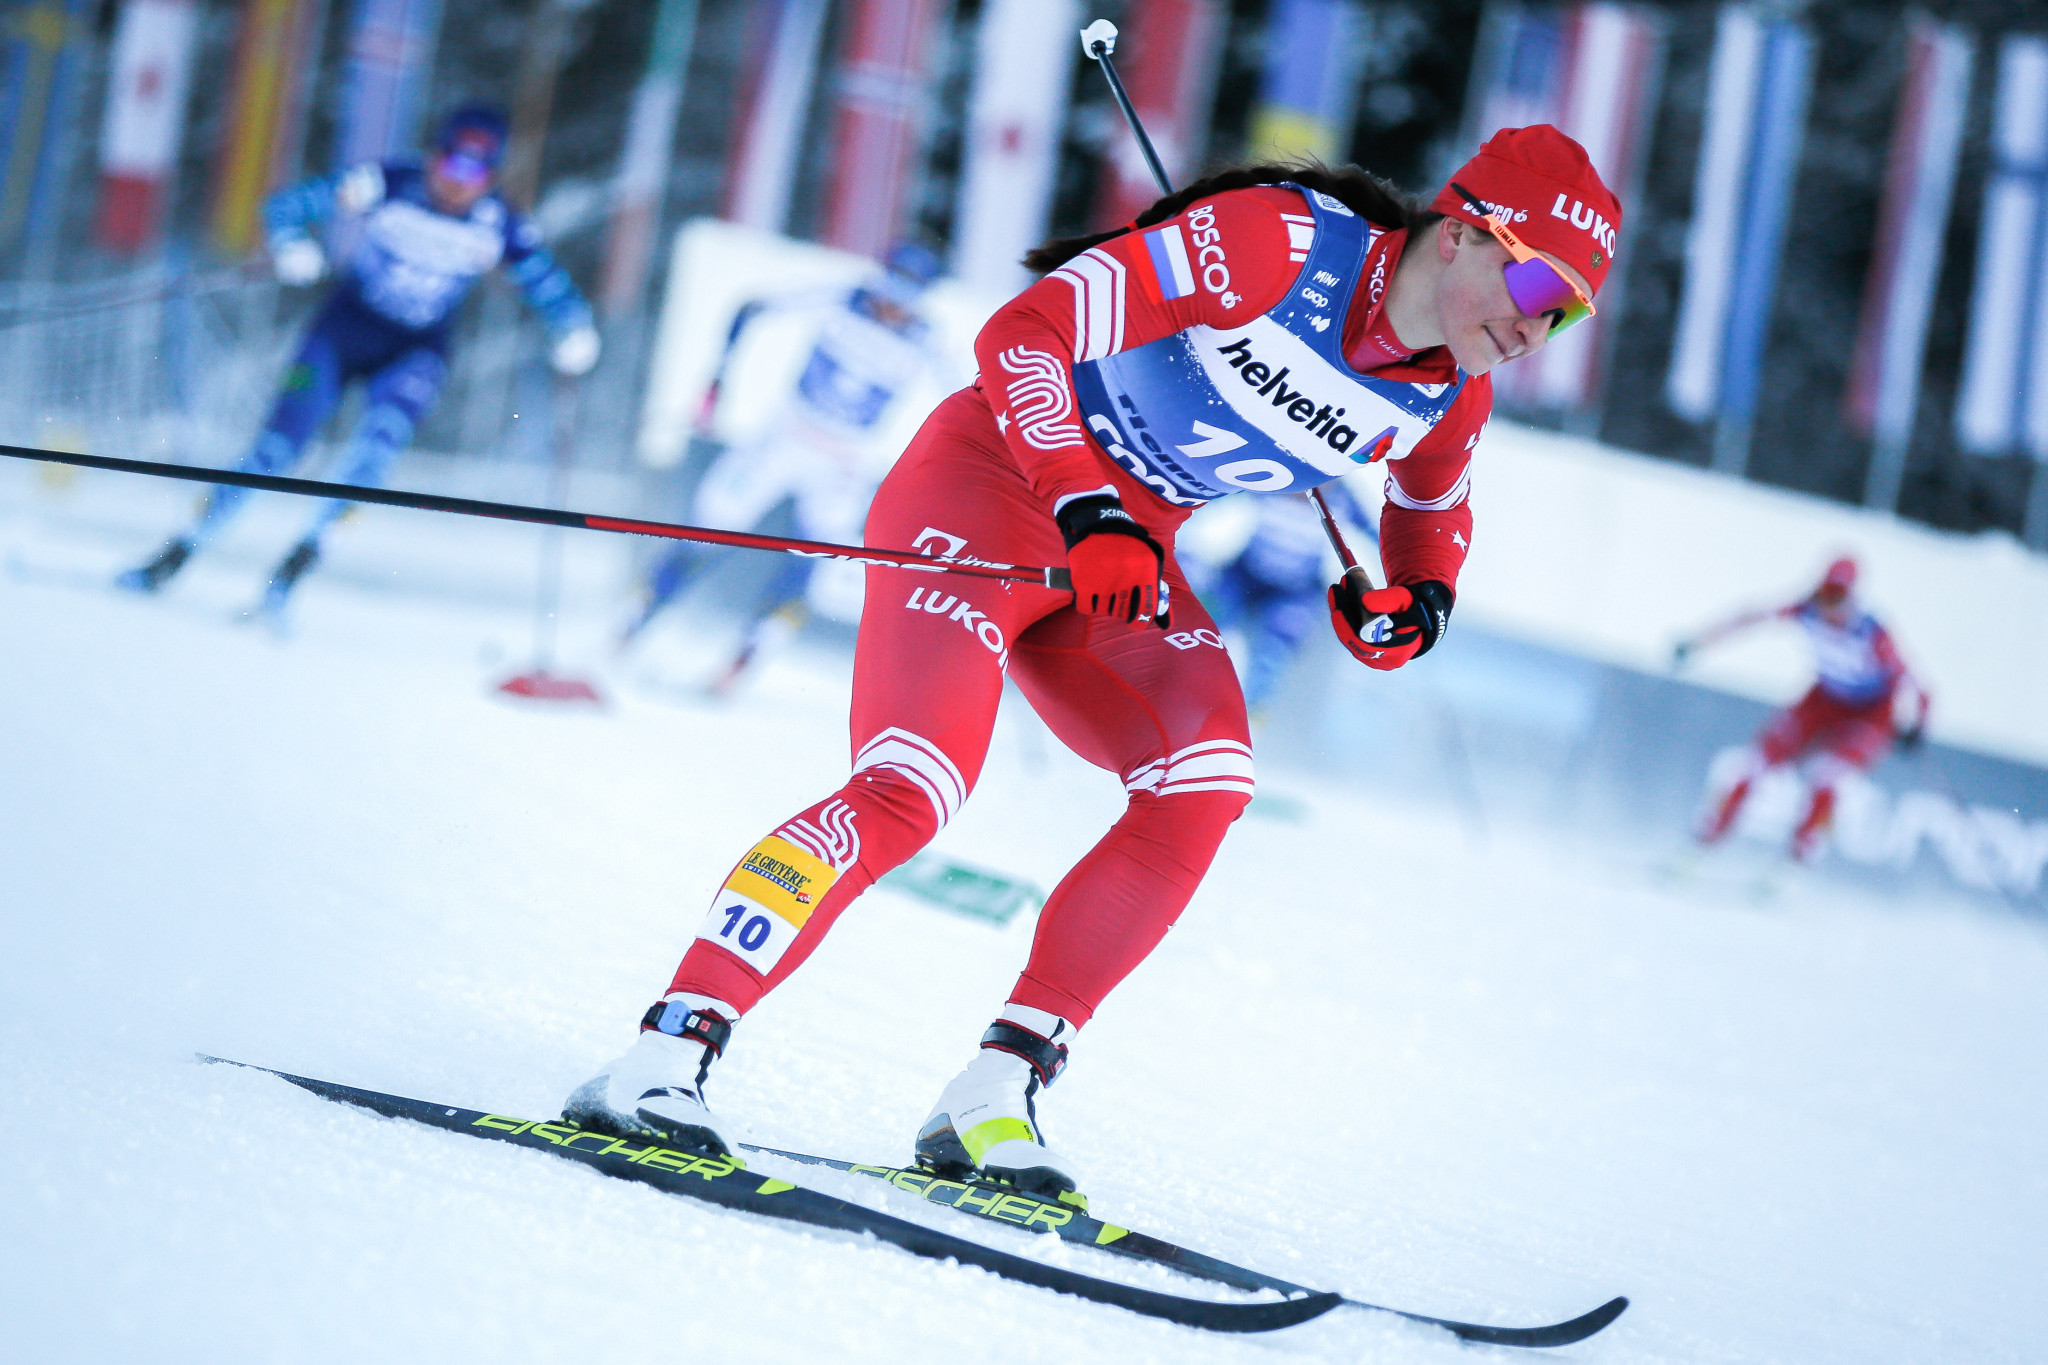 FIS to allow Nepryaeva to be awarded Cross-Country World Cup crystal globe, despite Russian ban